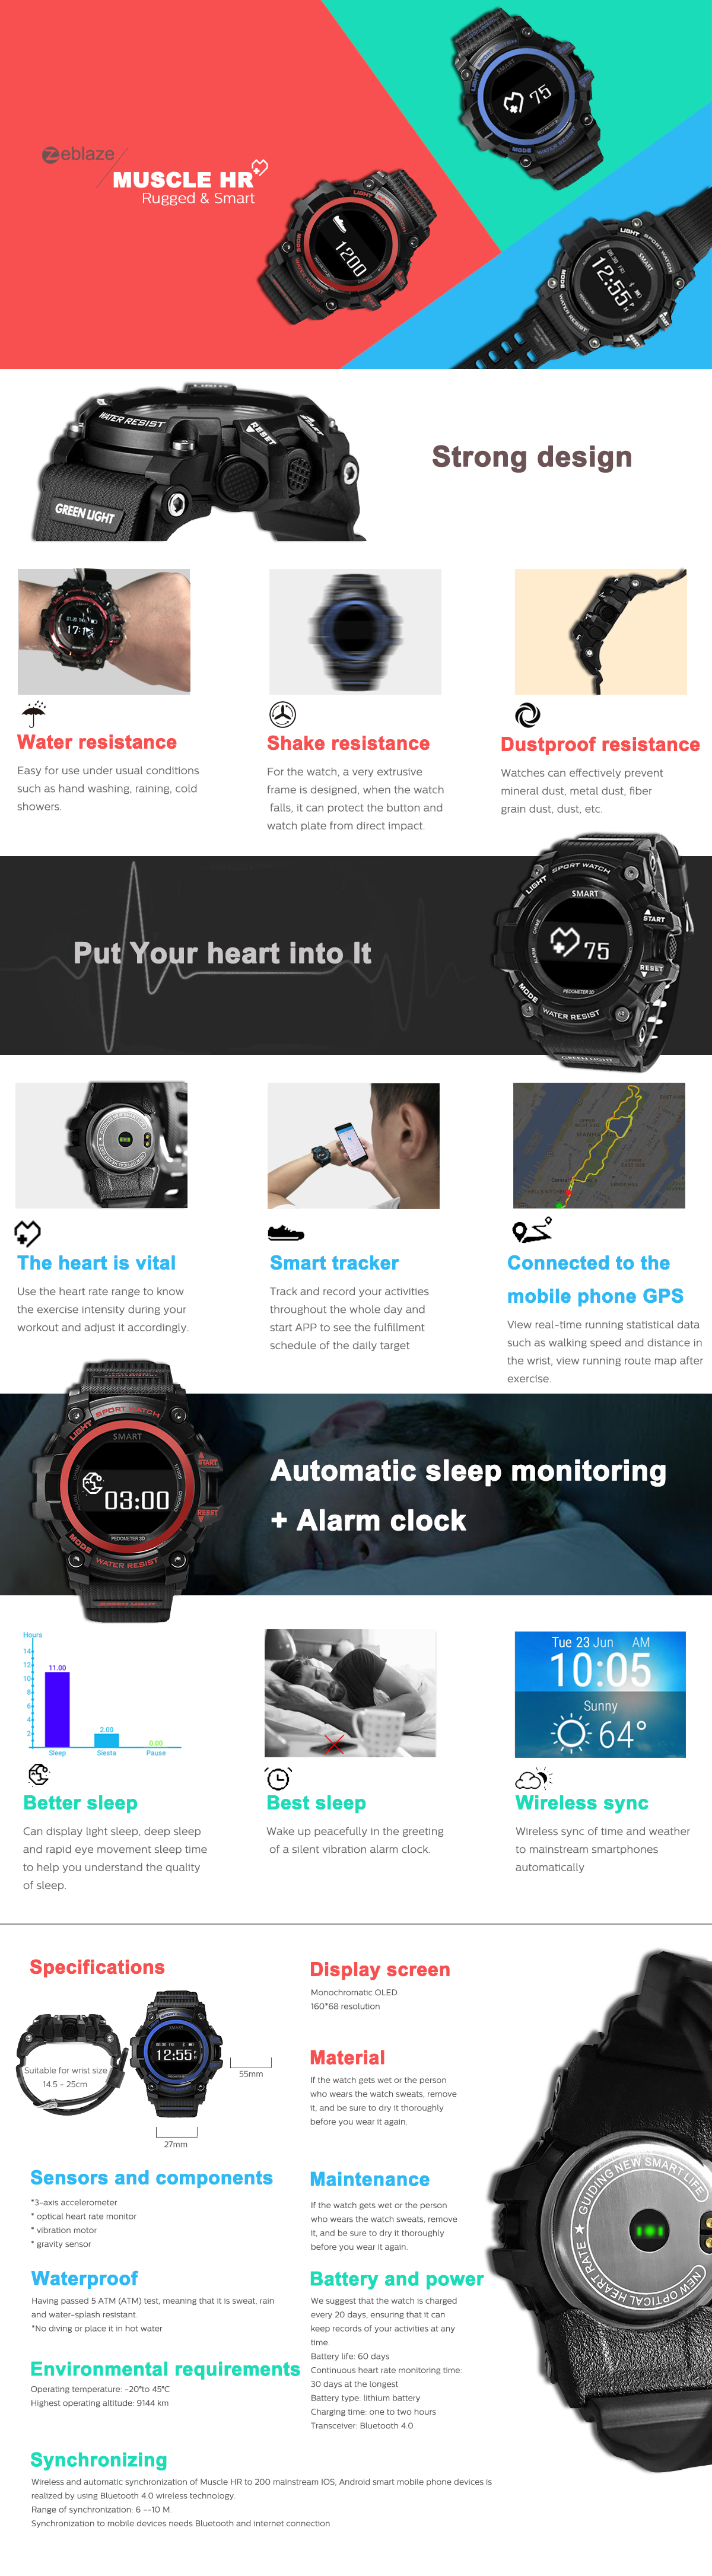 Zeblaze-Muscle-HR-Heart-Rate-Sleep-Monitor-IP68-Waterproof-Smart-Watch-Wristband-for-iOS-Android-1185257